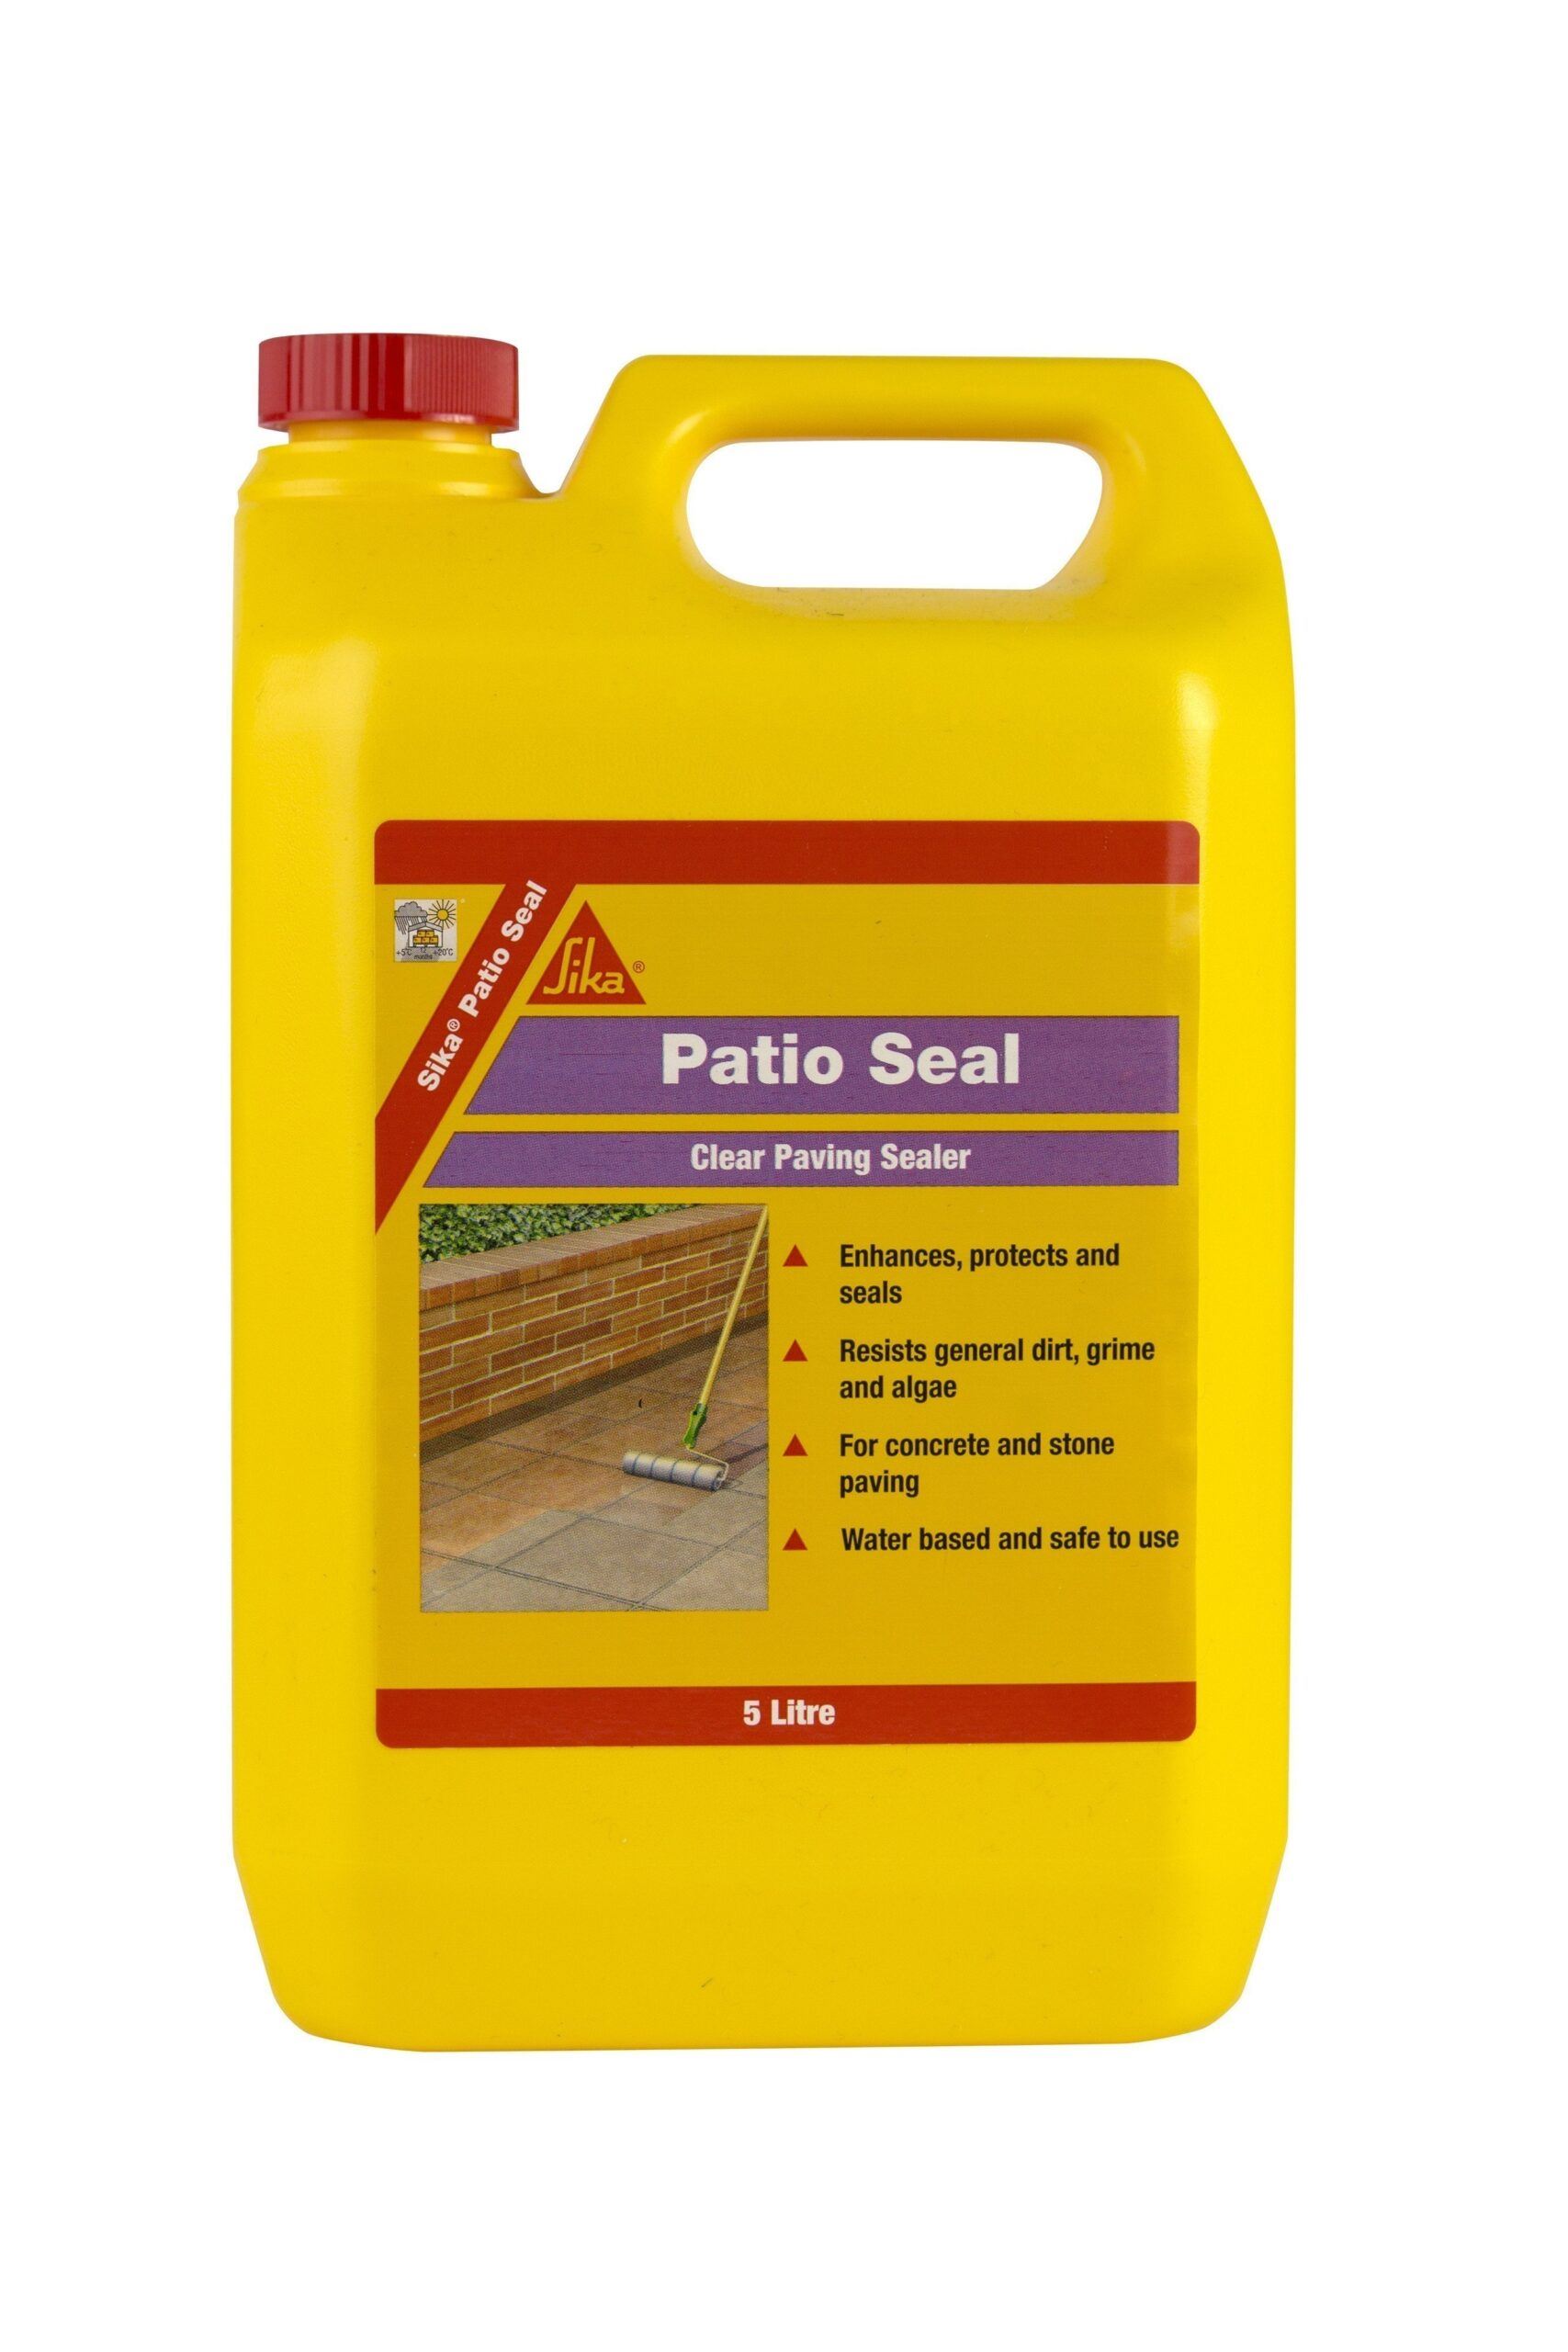 Sika Patio Seal 5L